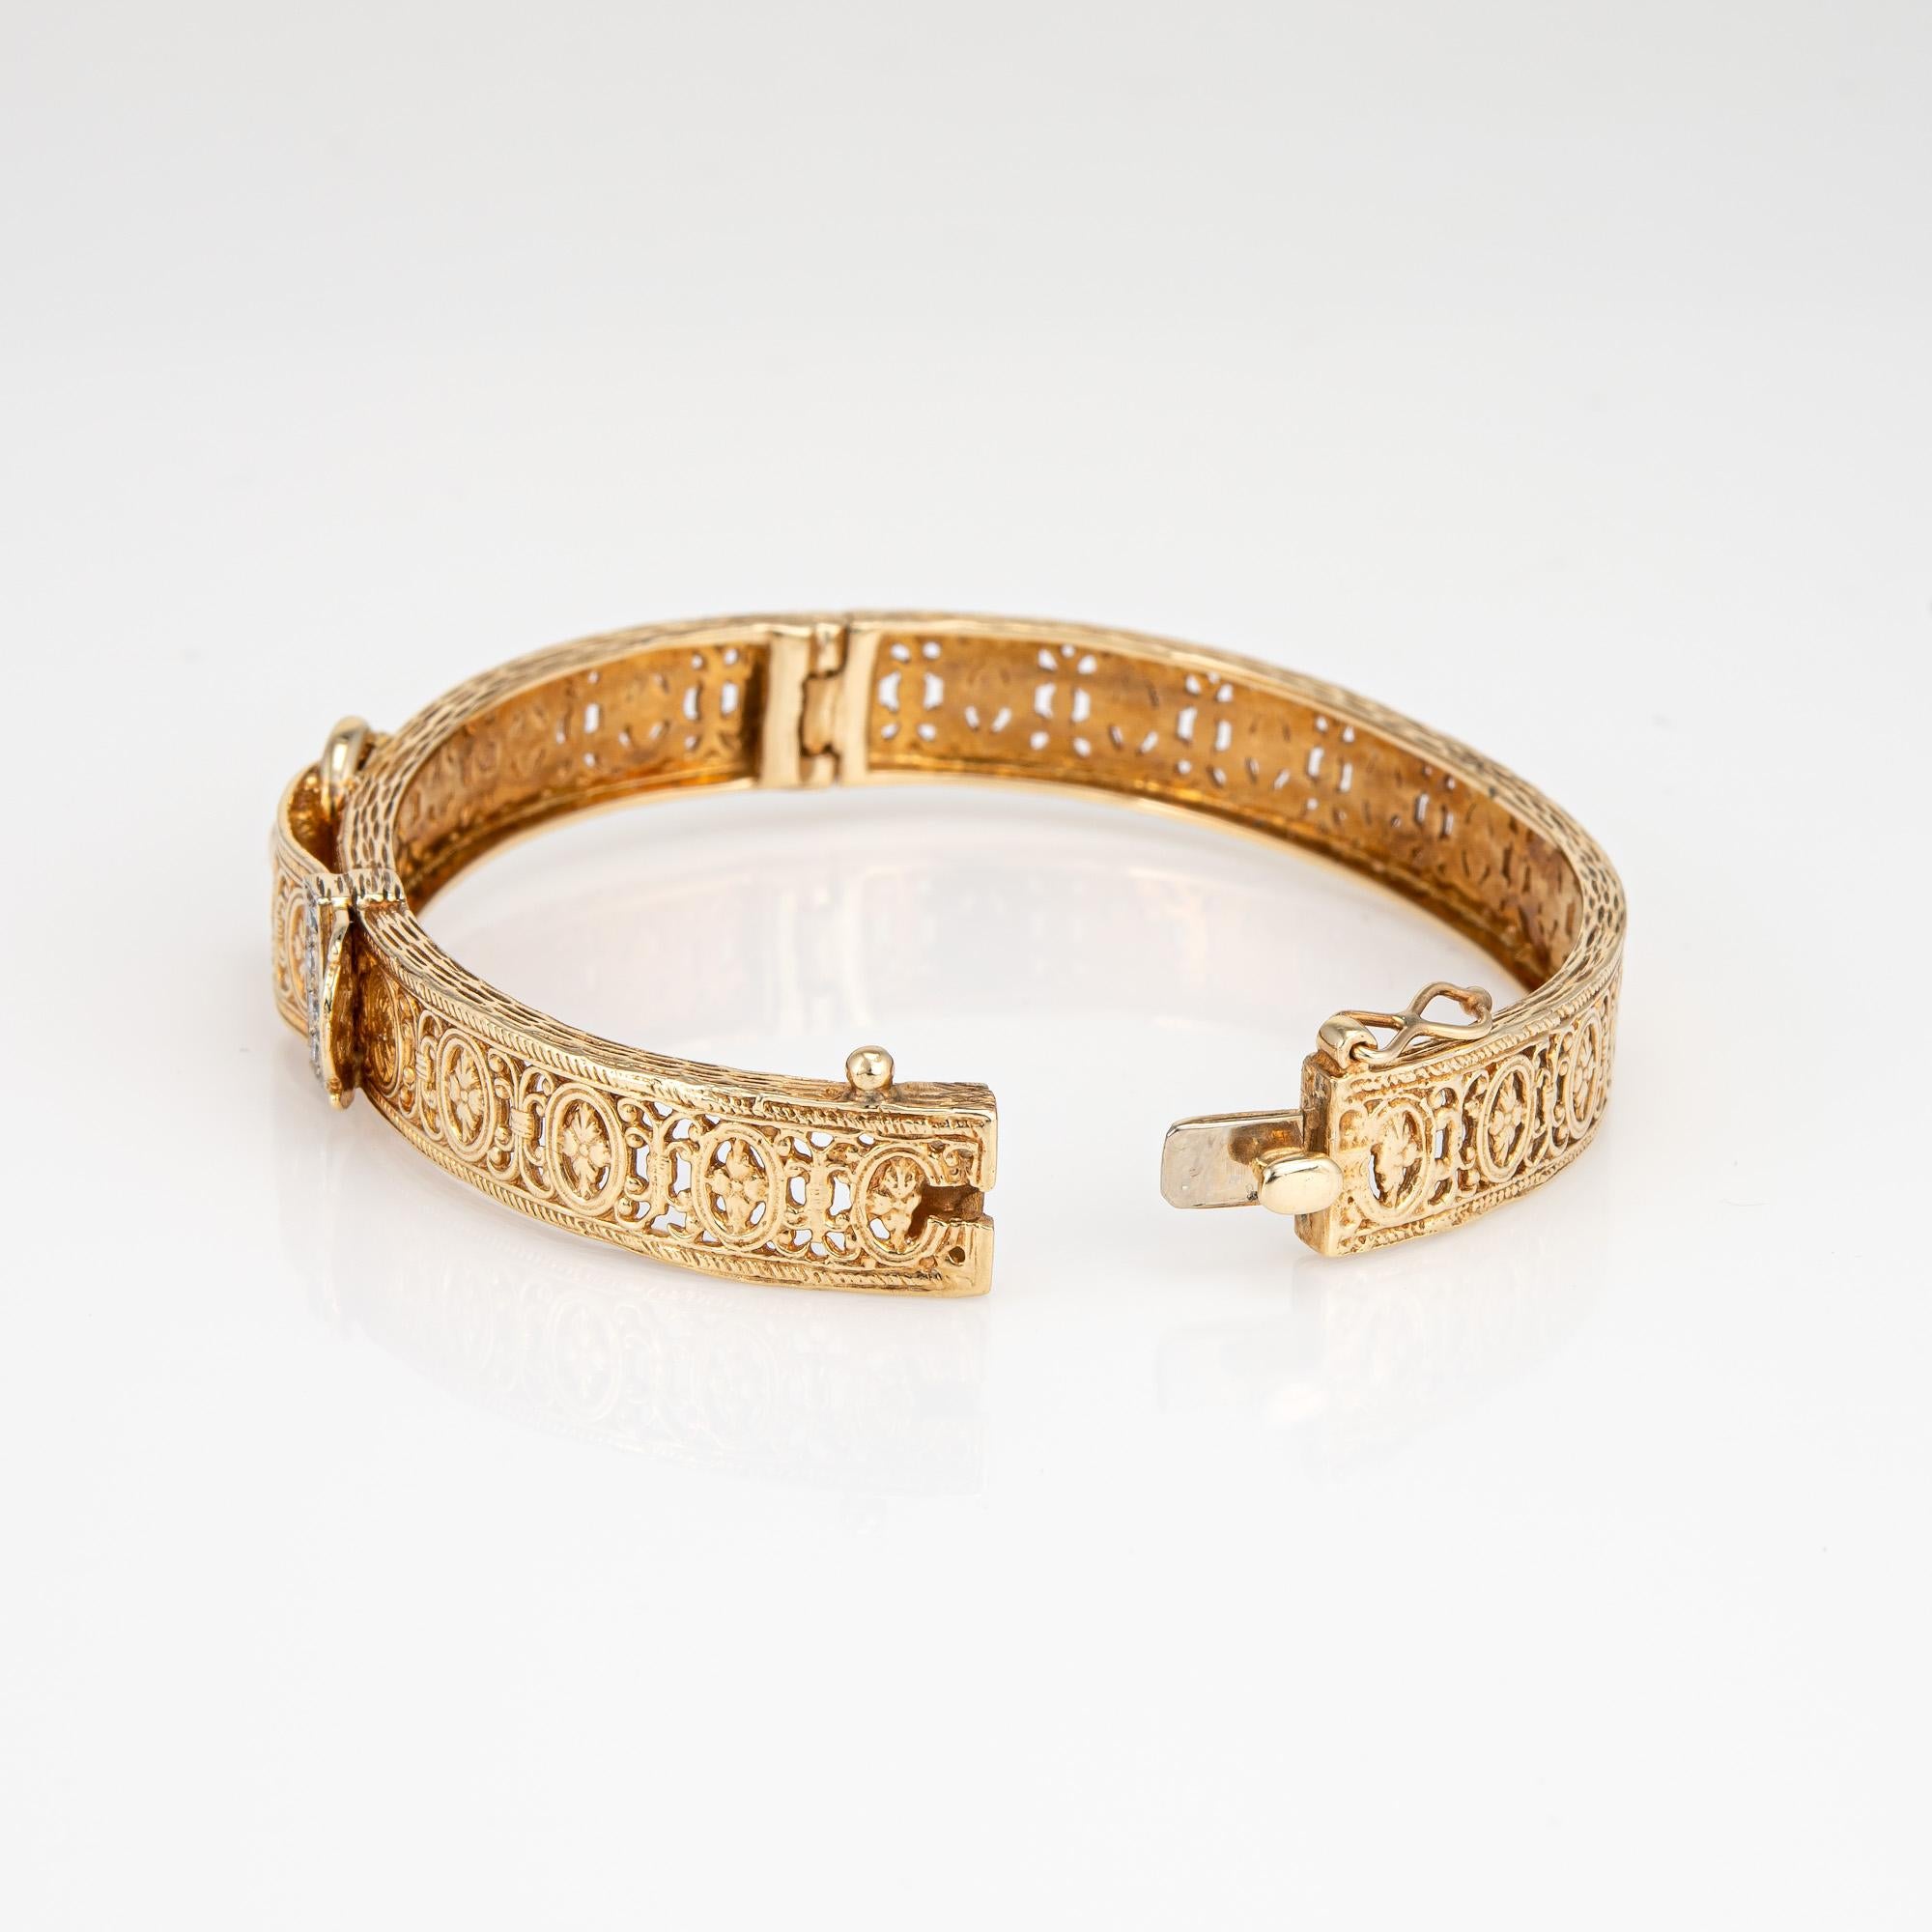 Stylish and finely detailed vintage buckle bracelet crafted in 14 karat yellow gold. 

Four diamonds total an estimated 0.08 carats 9estimated at H-I color and VS2-SI1 clarity). 

The bangle features an elaborate design of scrolled and paneled